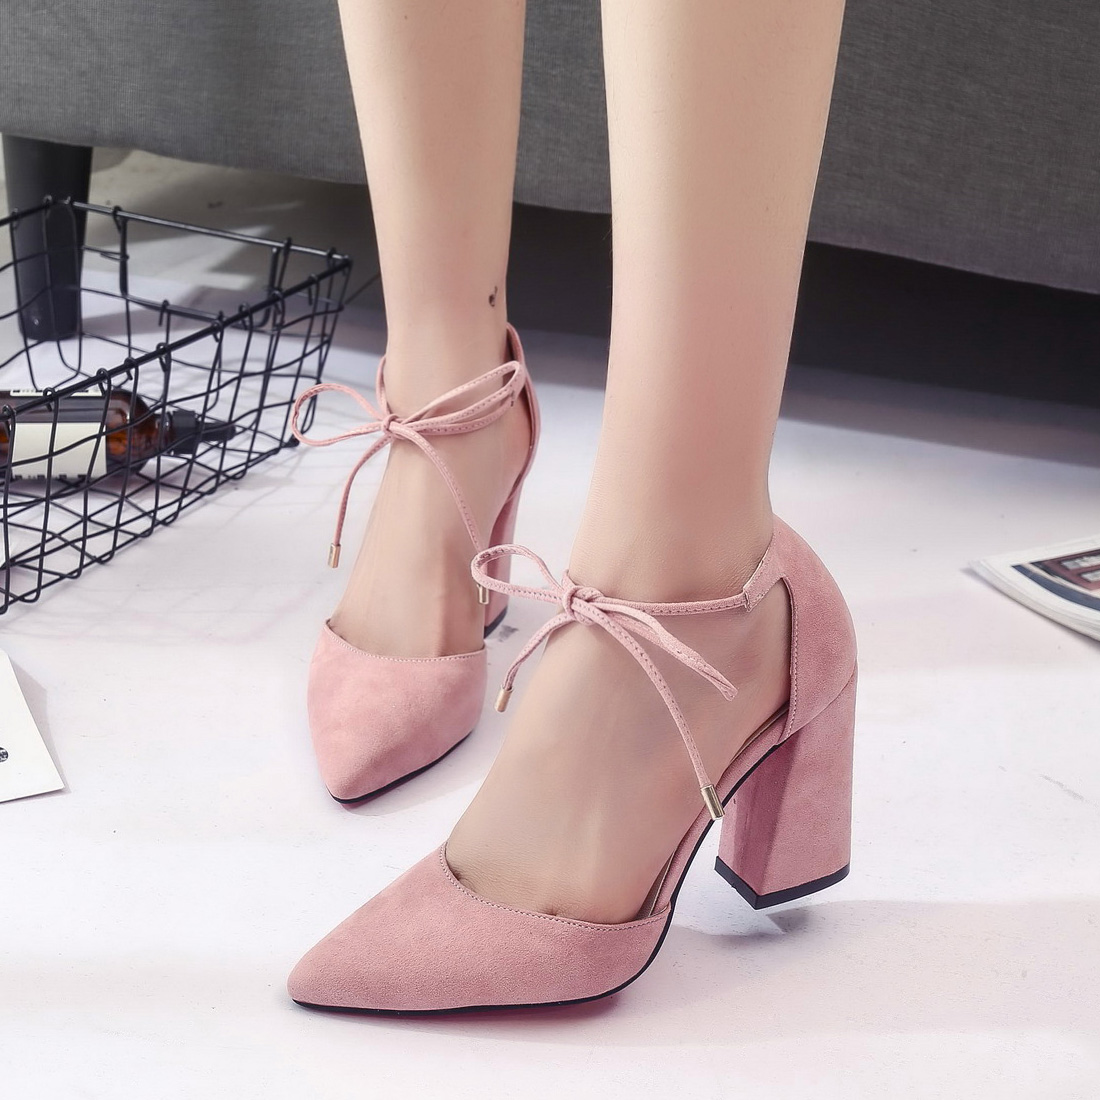 Cute Lace Up Summer Suede High Heels Pointed Toe Shoes